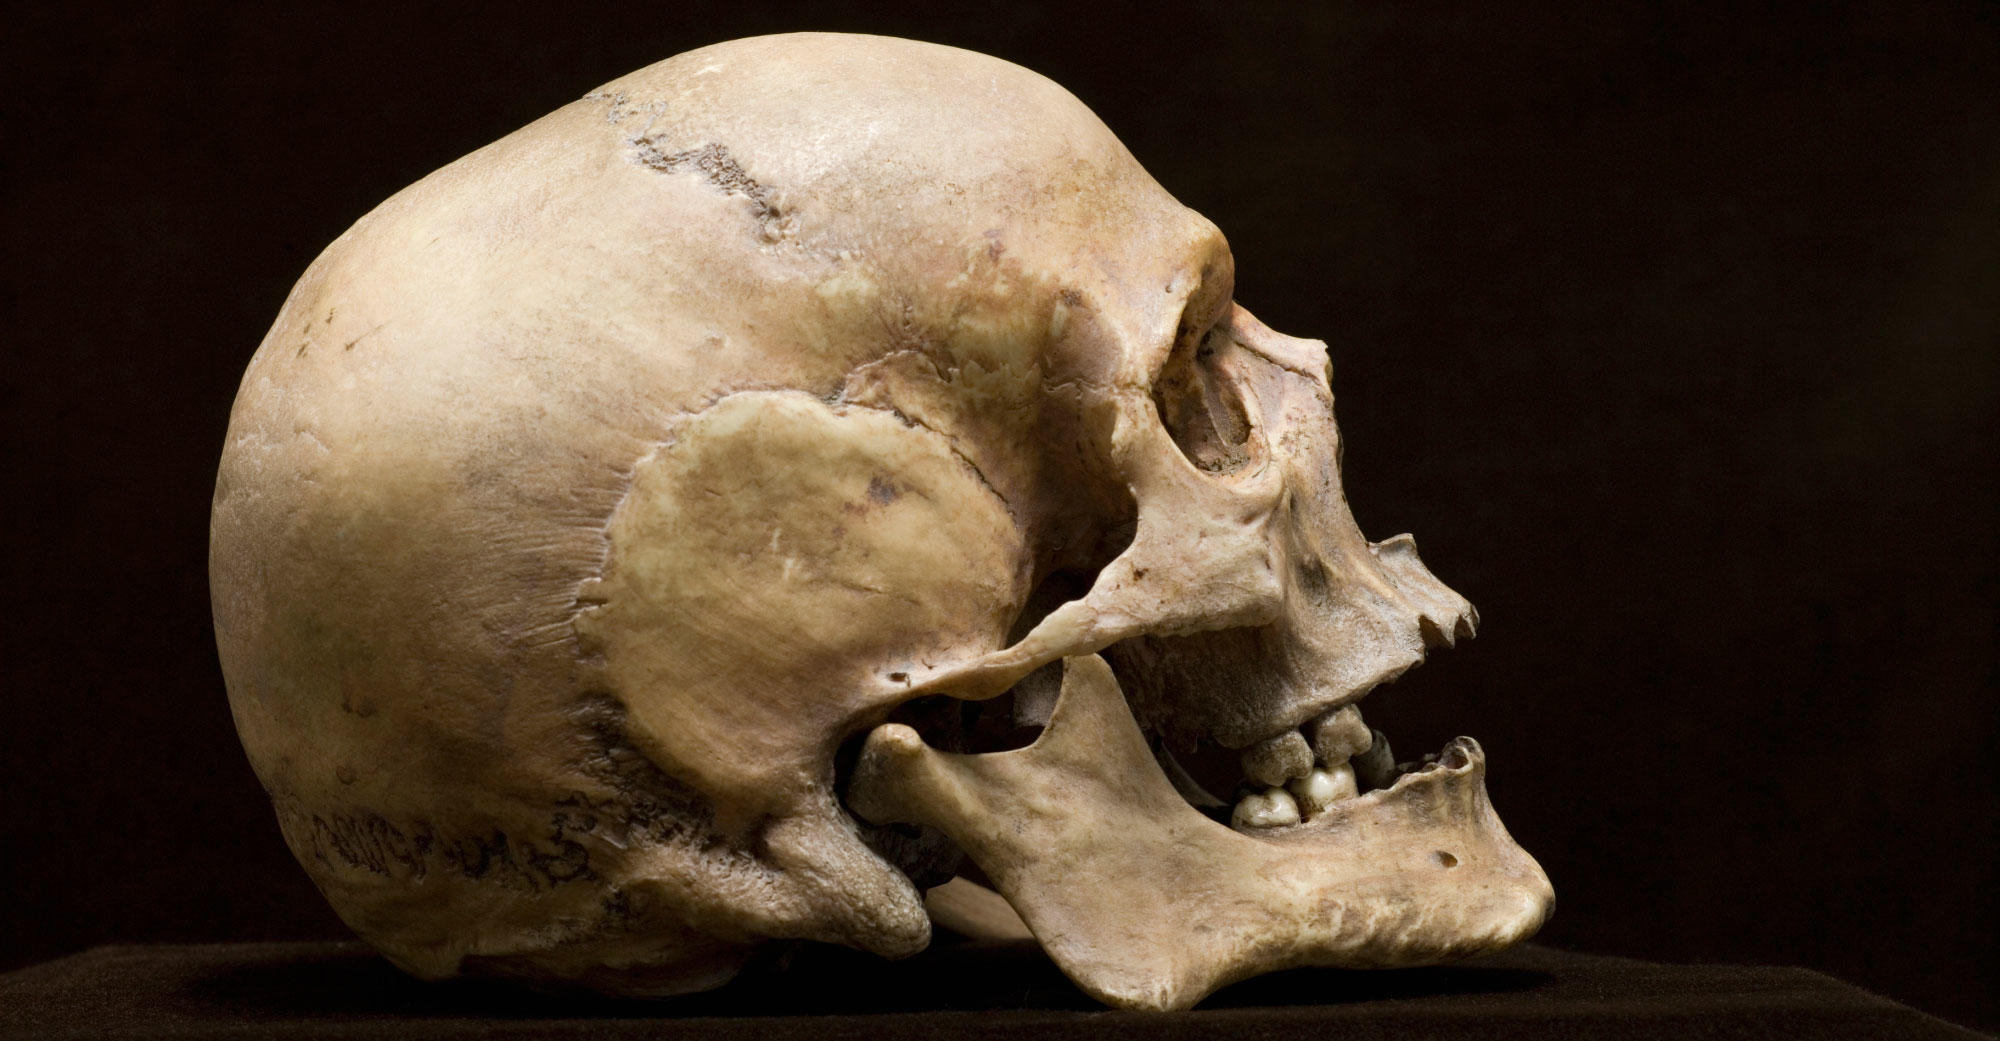 New Study Explains Why Humans Have Chins | Discovery Blog | Discovery